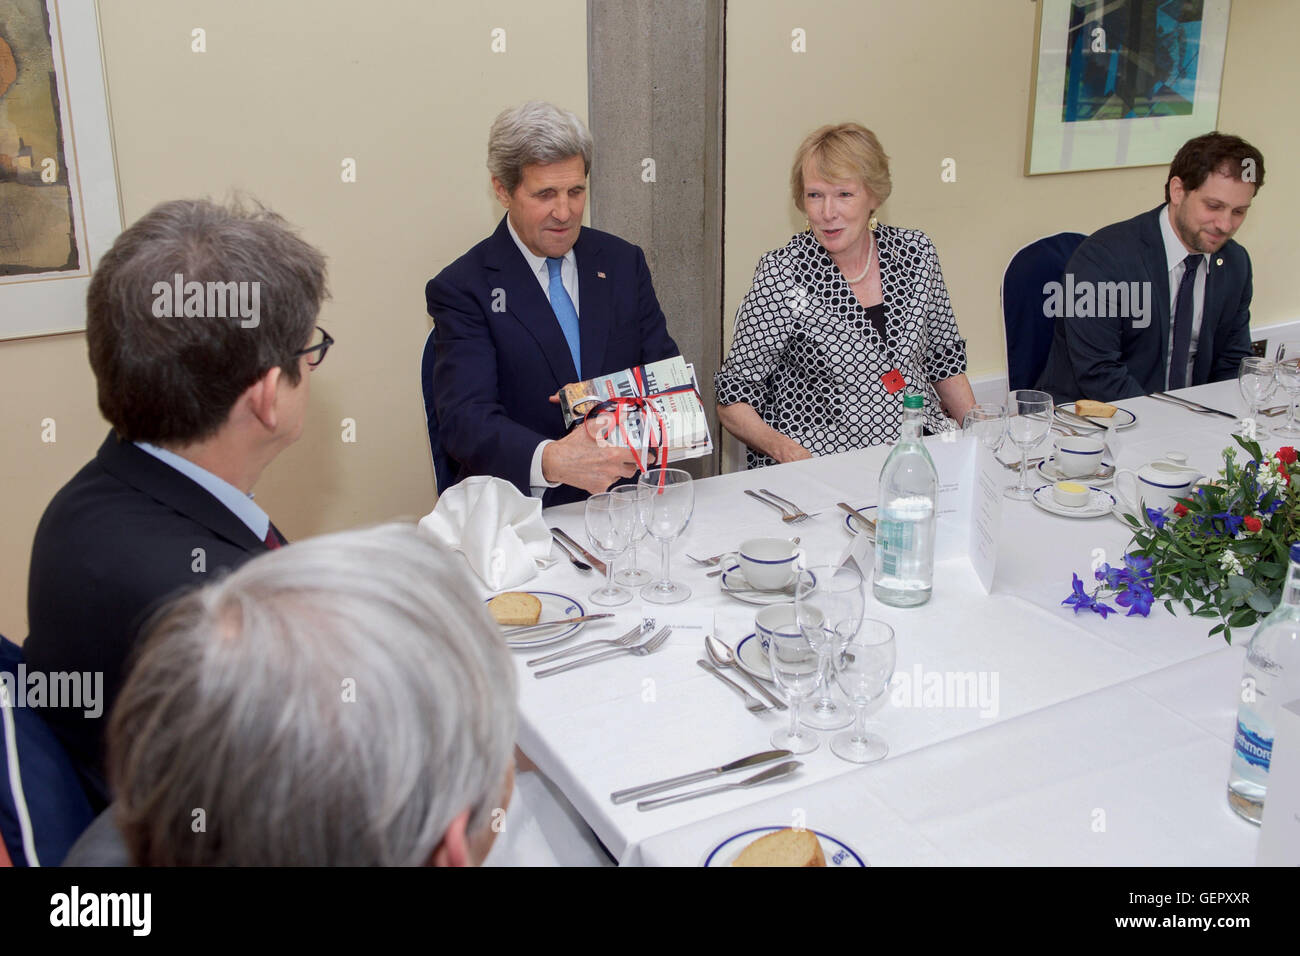 U.S. Secretary of State John Kerry Meets With Group at St. Antony's College in Oxford Stock Photo